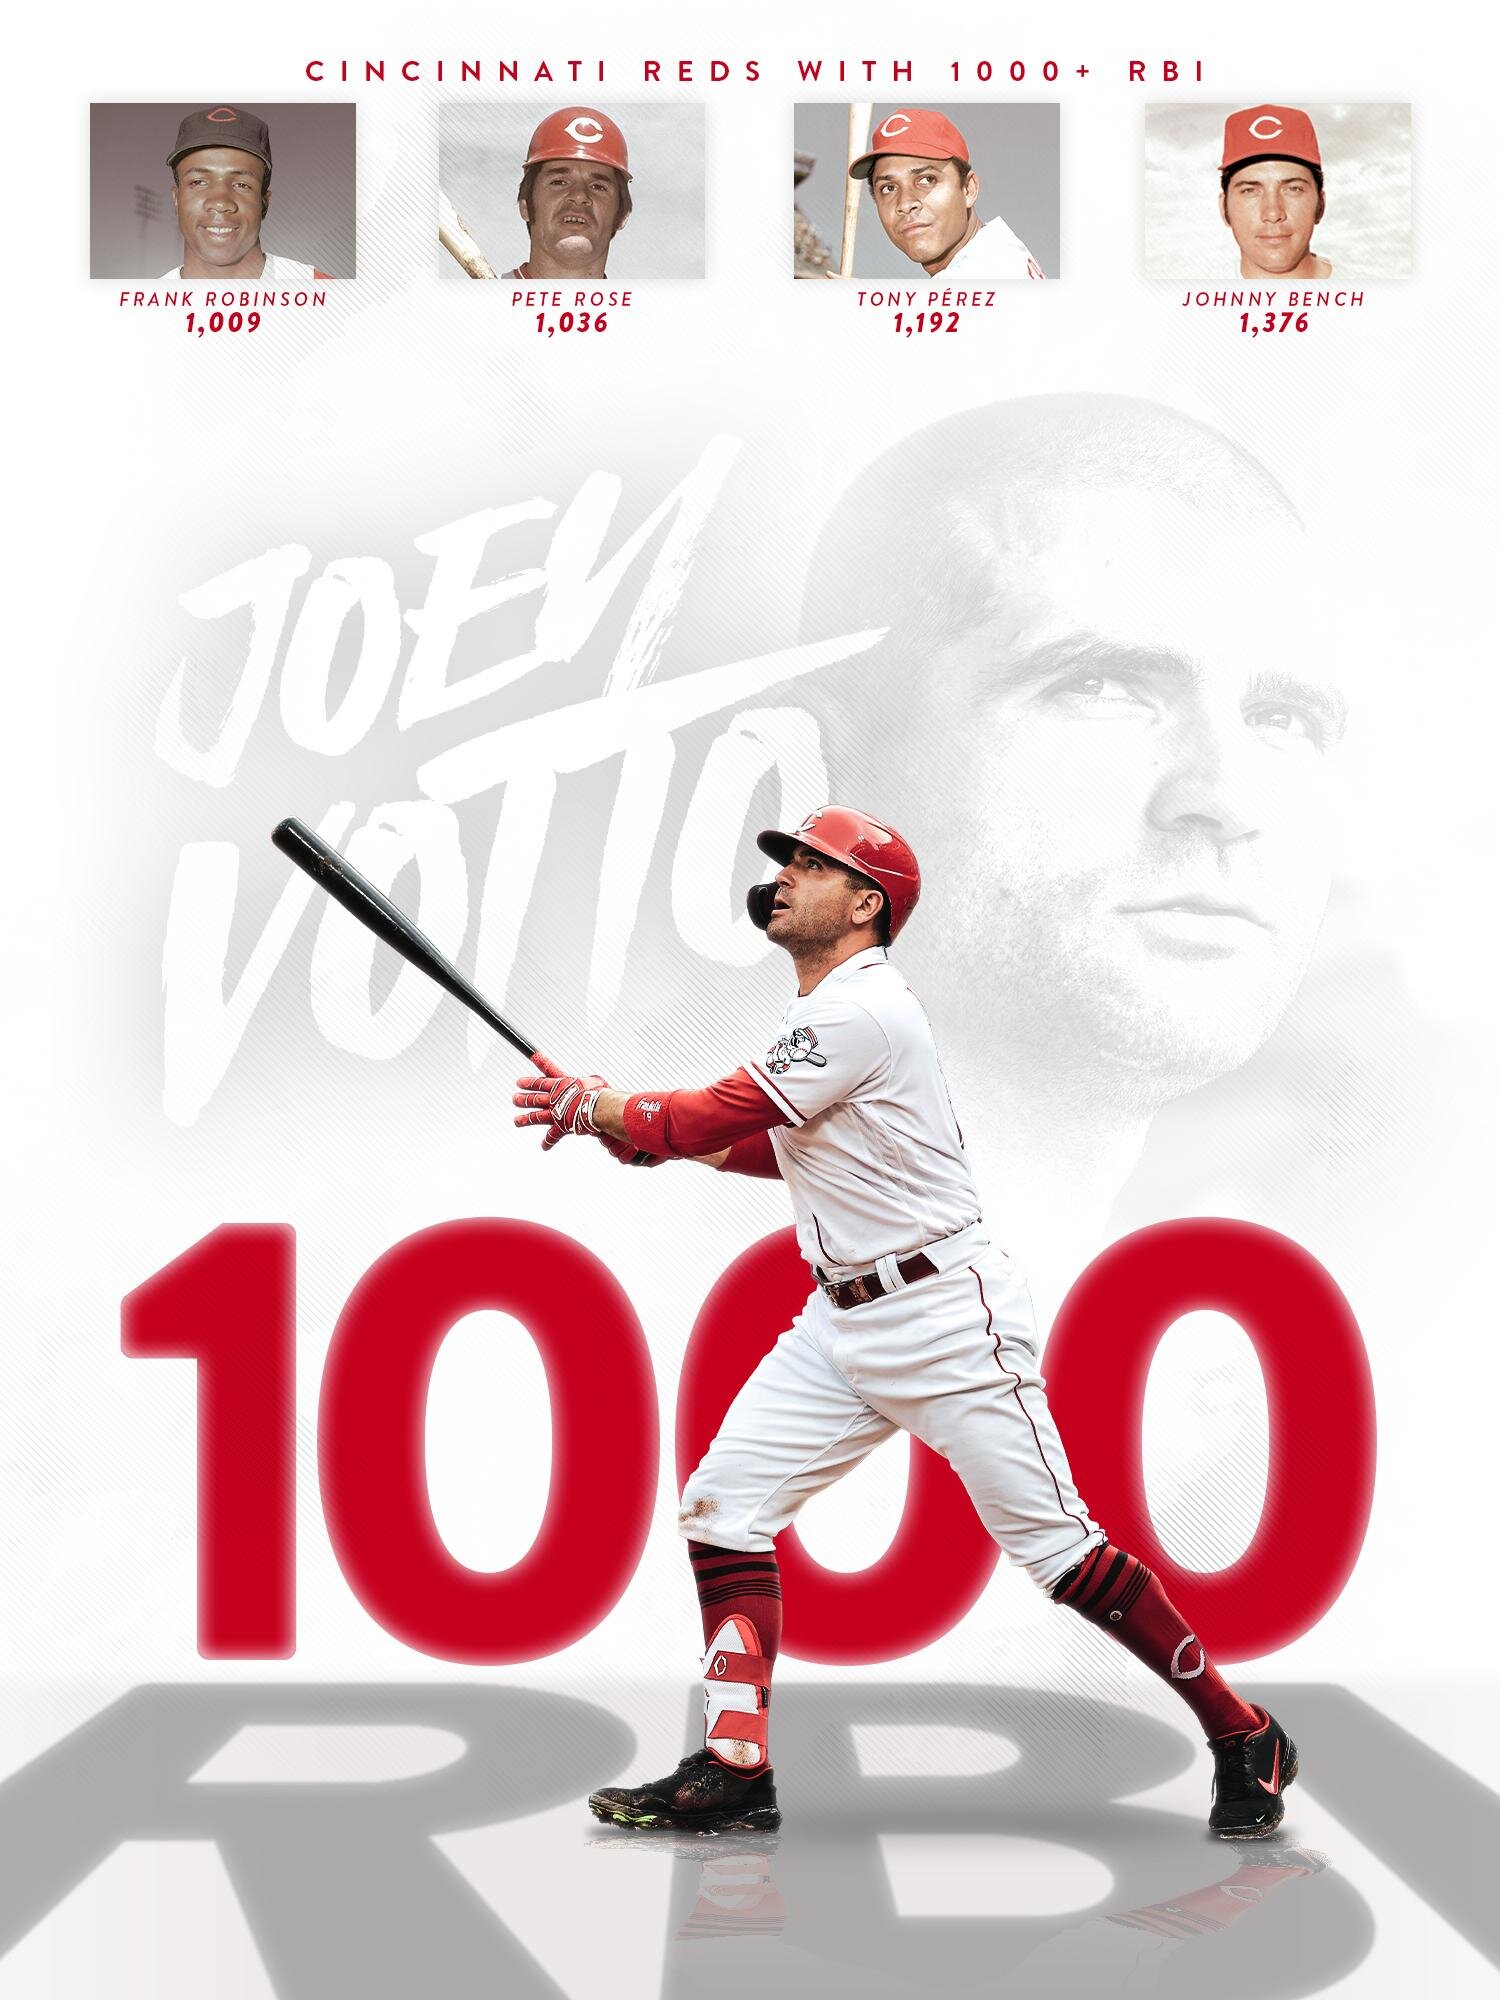 Votto registers 1,000th RBI — Canadian Baseball Network